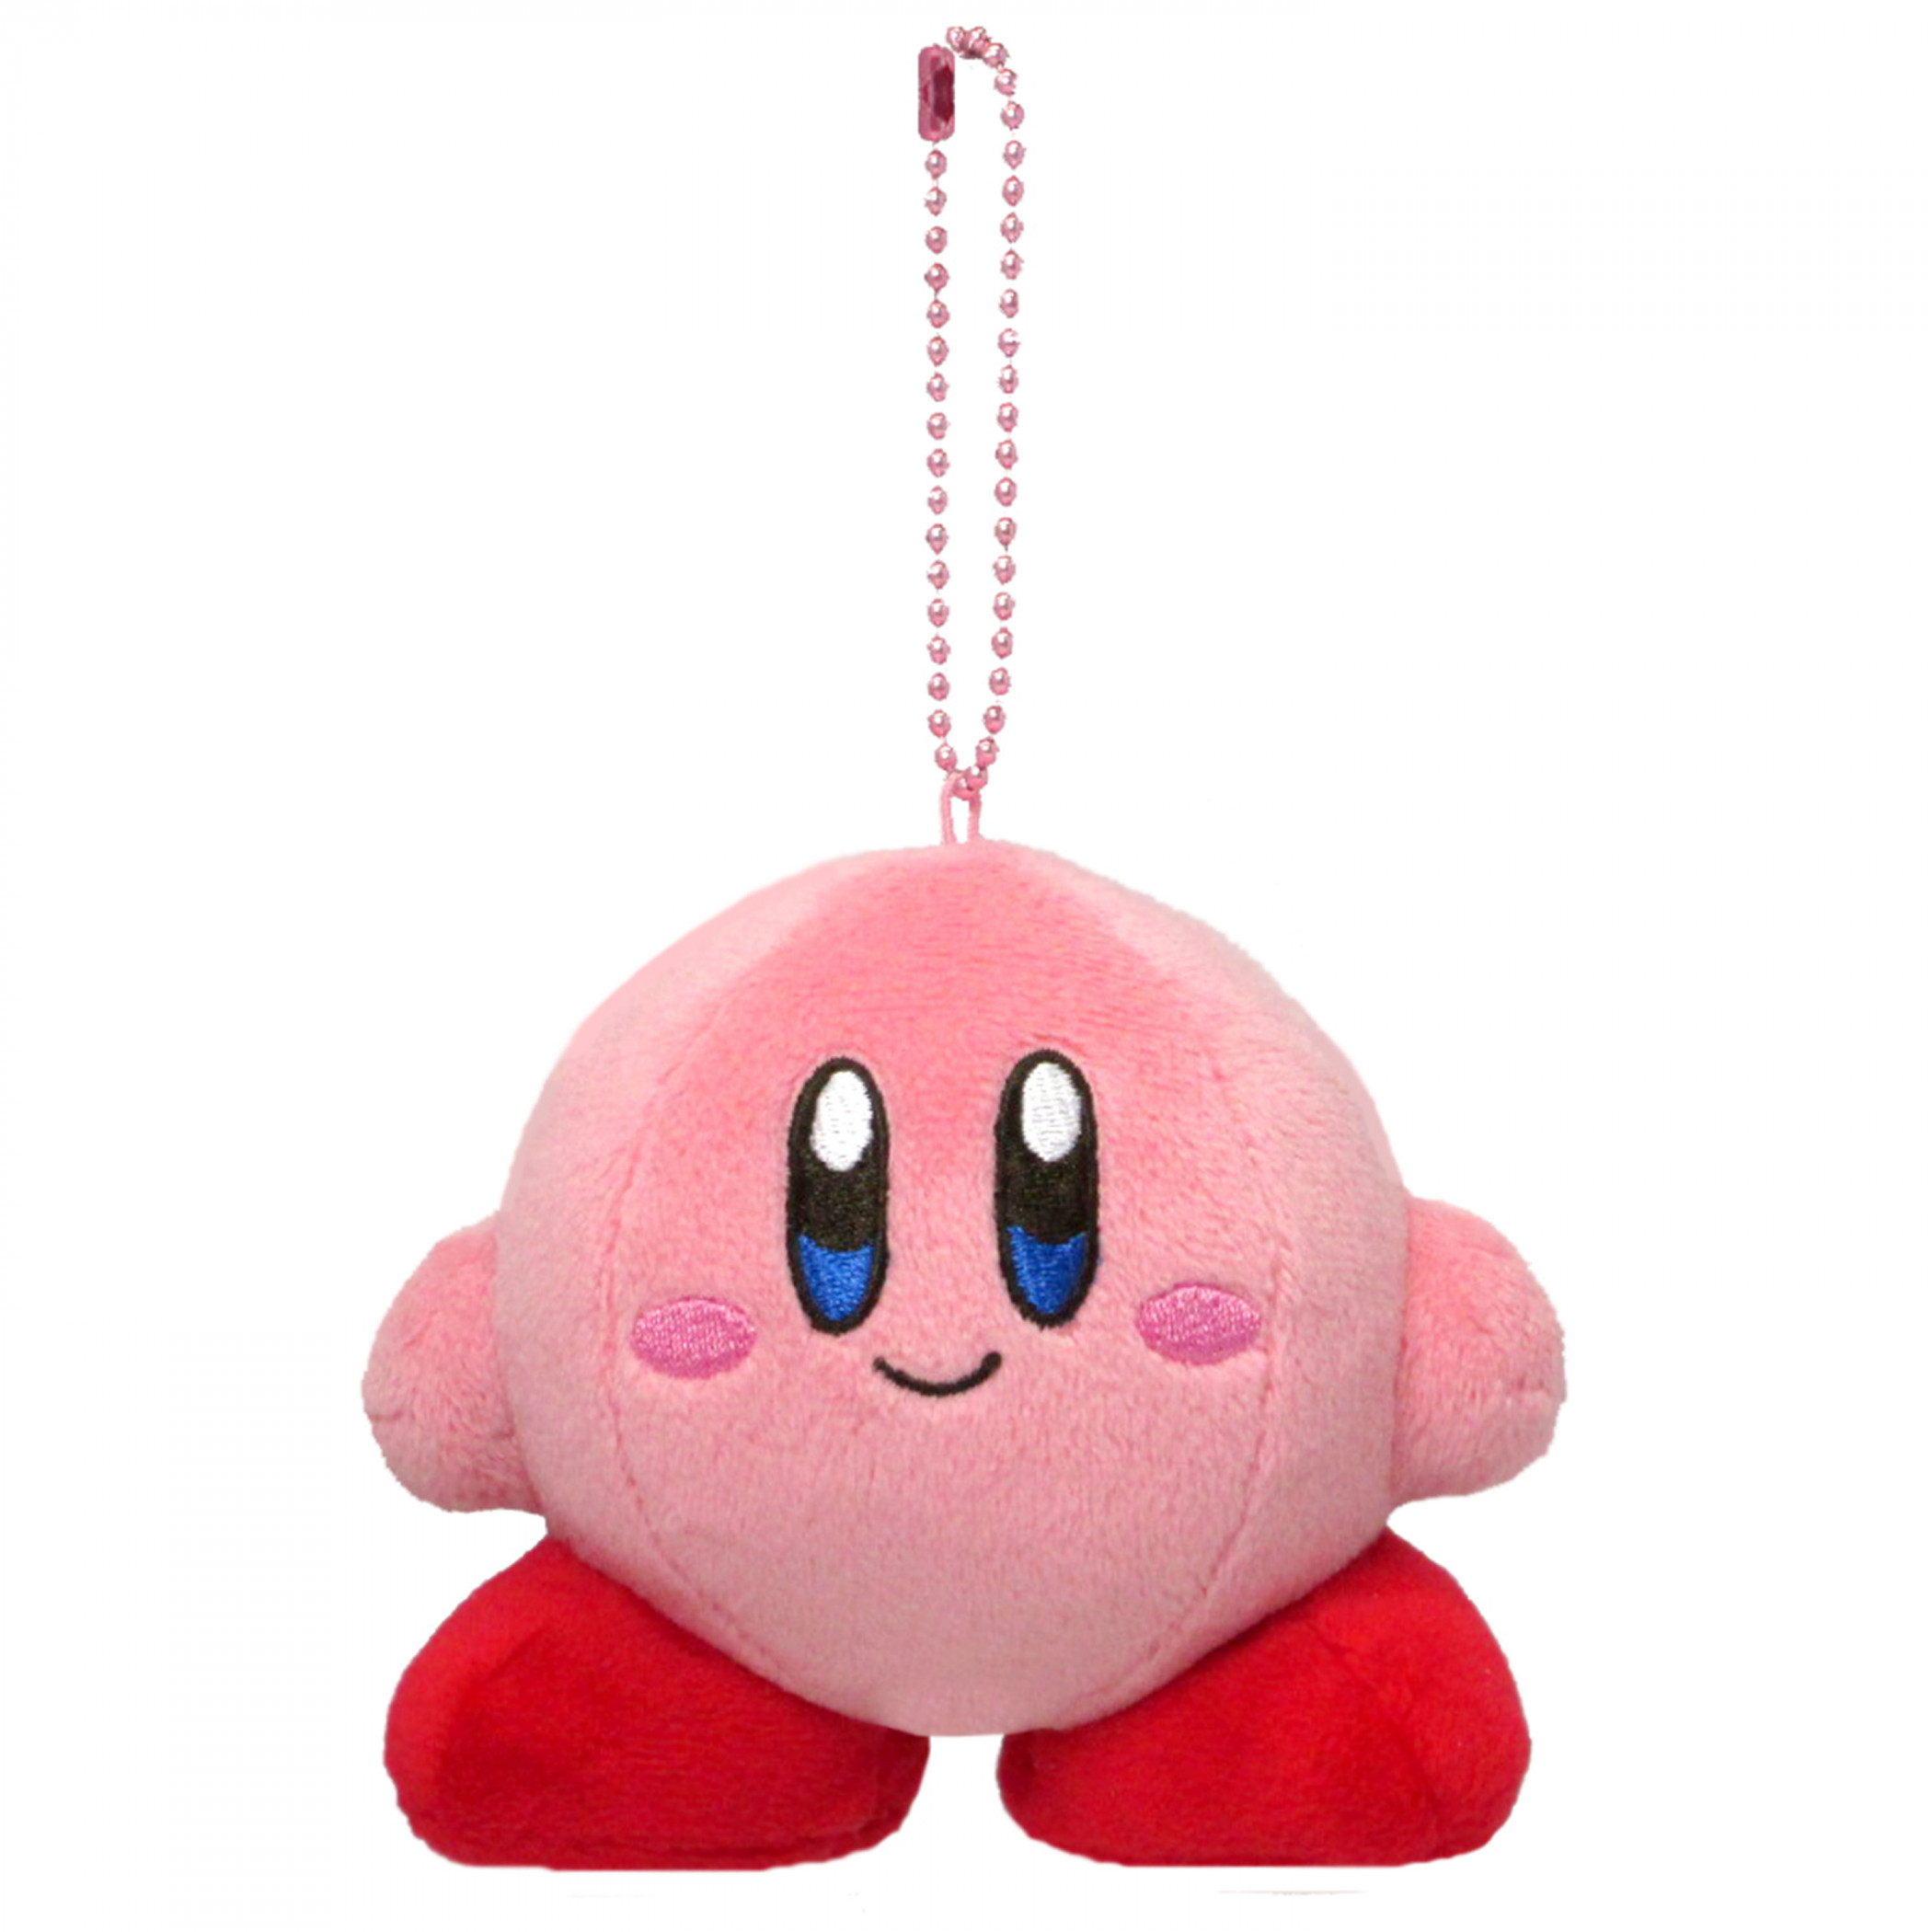 Kirby 3.5" Plush Toy with Chain